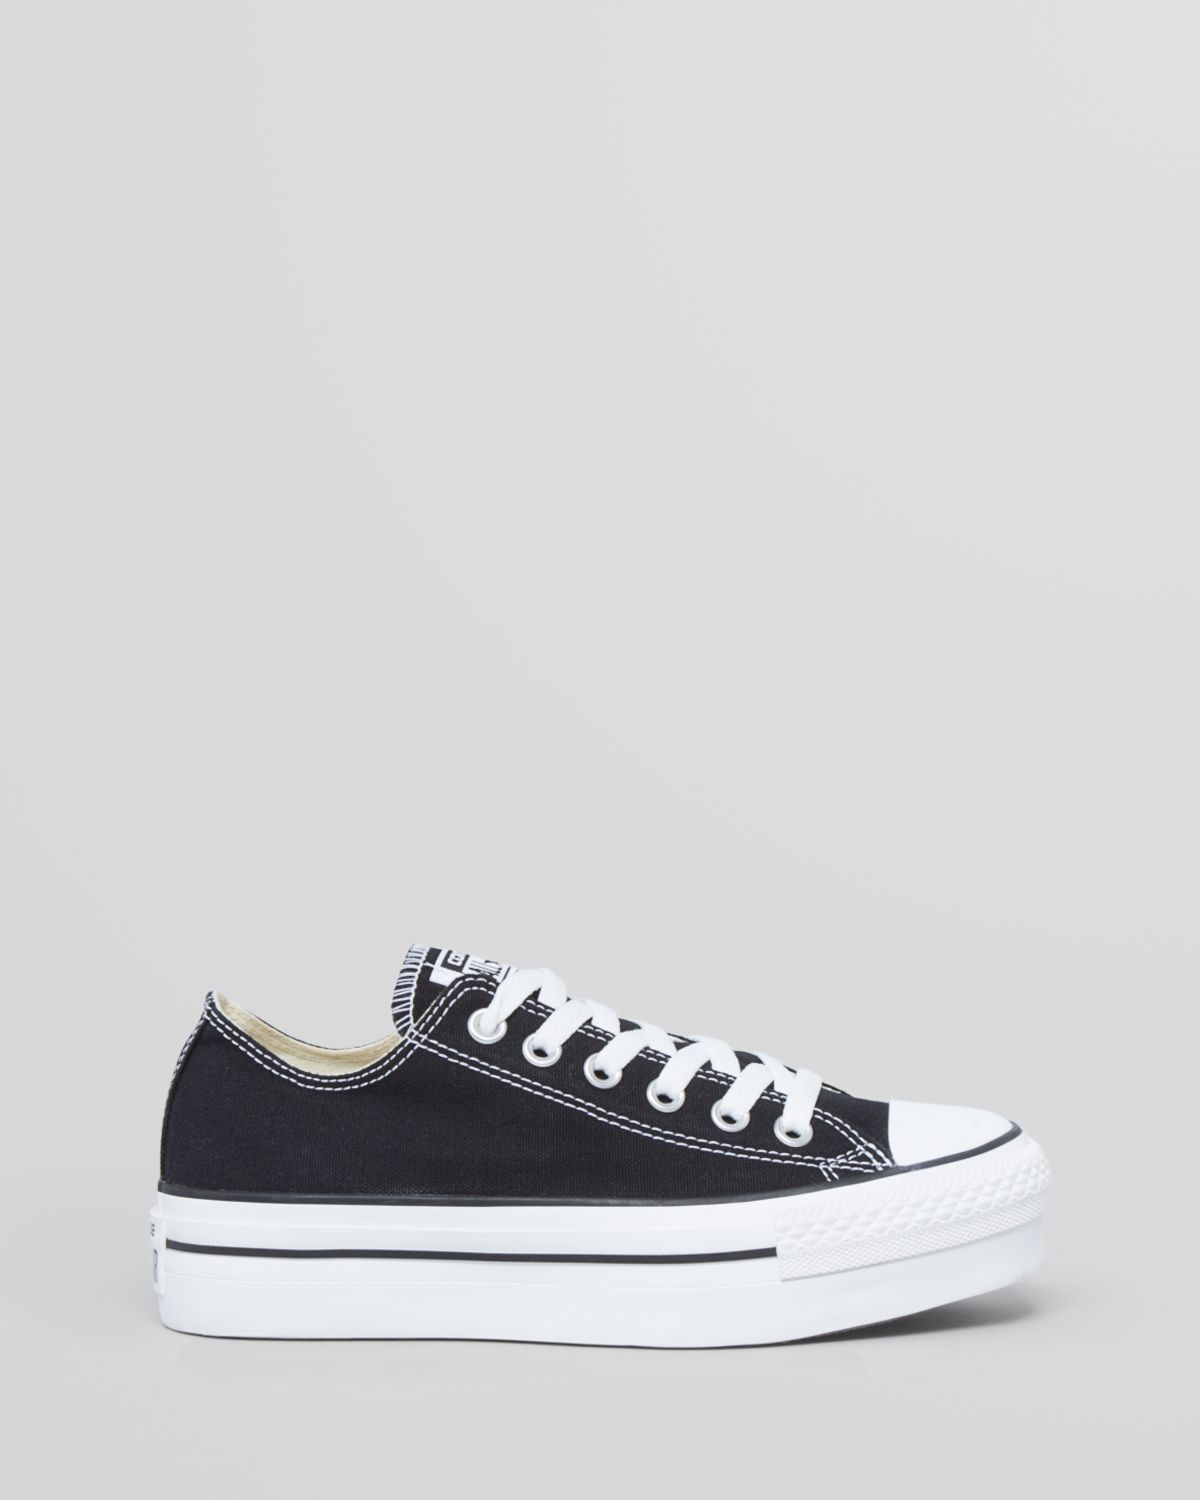 Converse Lace Up Platform Sneakers All Star in Black - Lyst